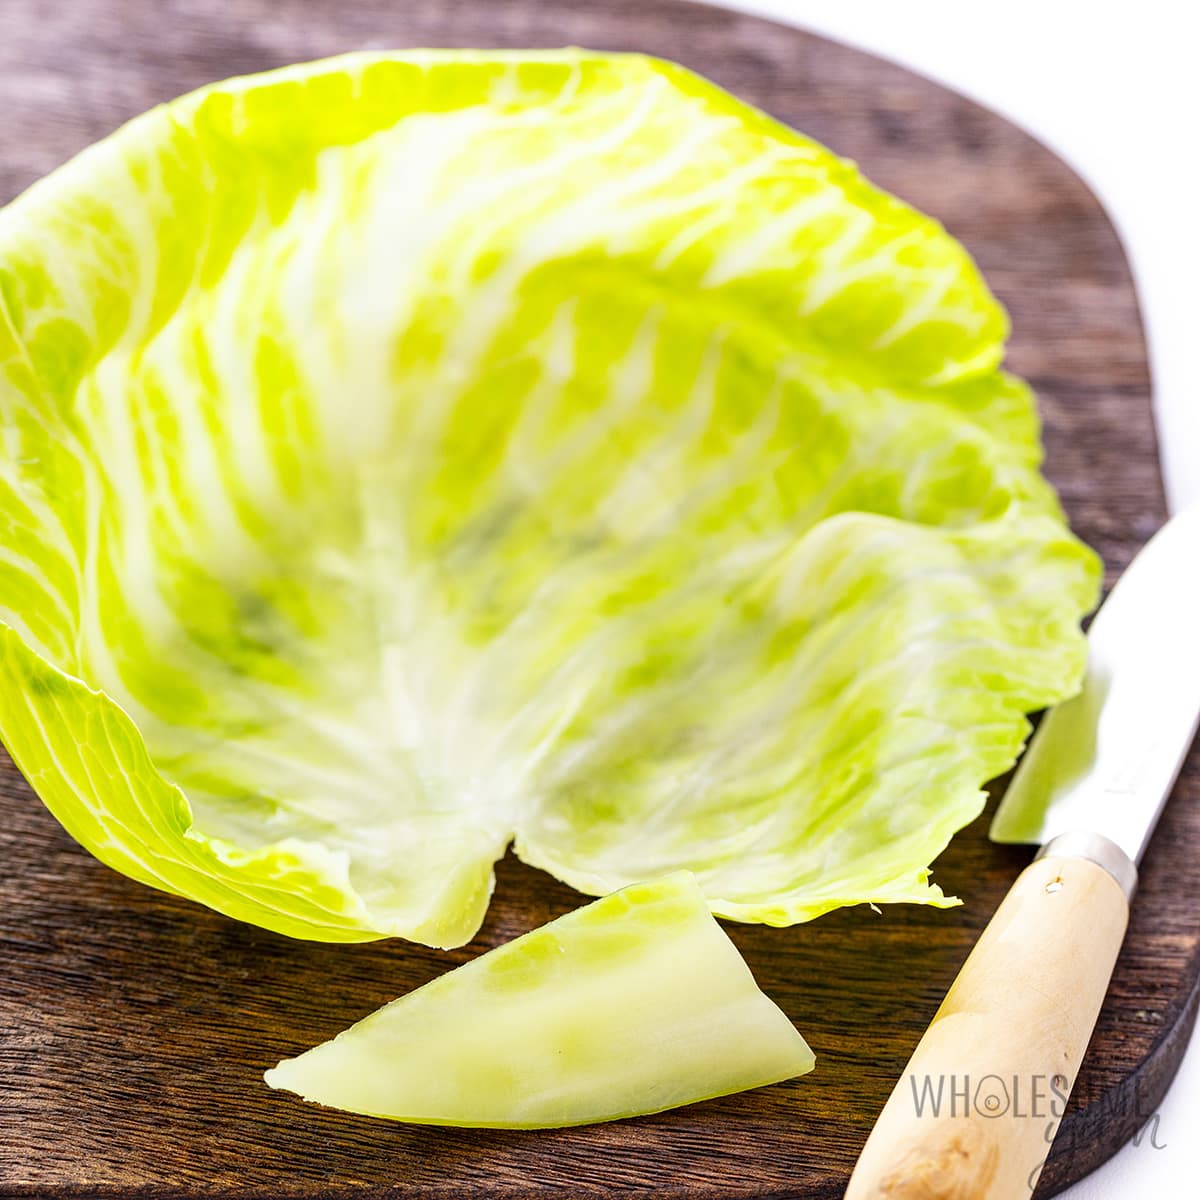 Cabbage leaf on the cutting board with core cut away.